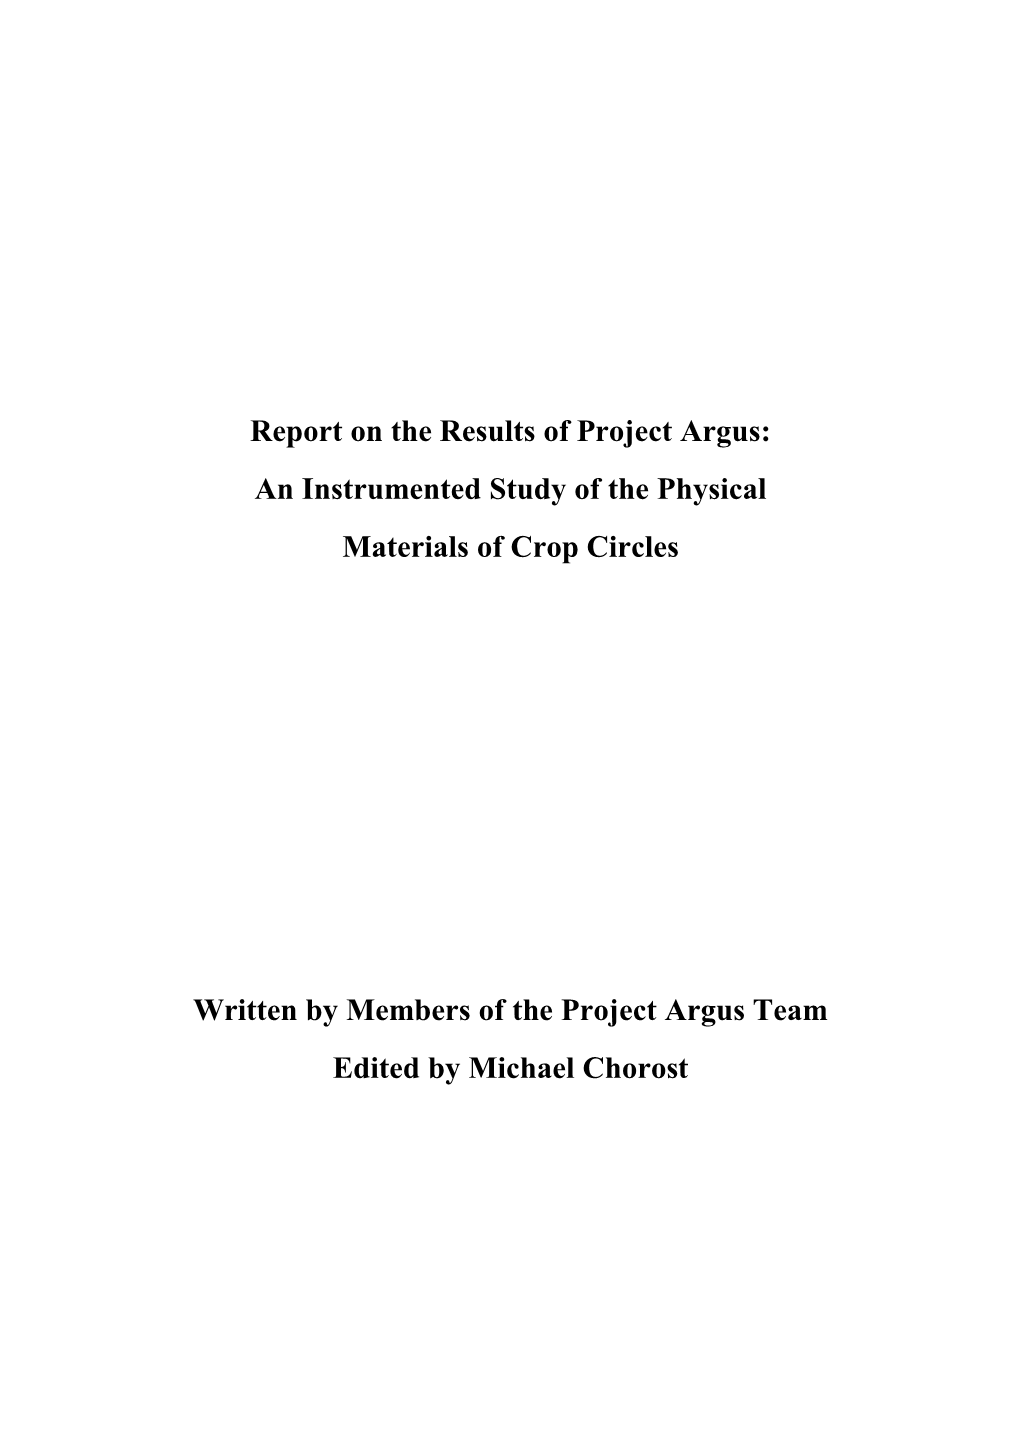 Report on the Results of Project Argus: an Instrumented Study of the Physical Materials of Crop Circles